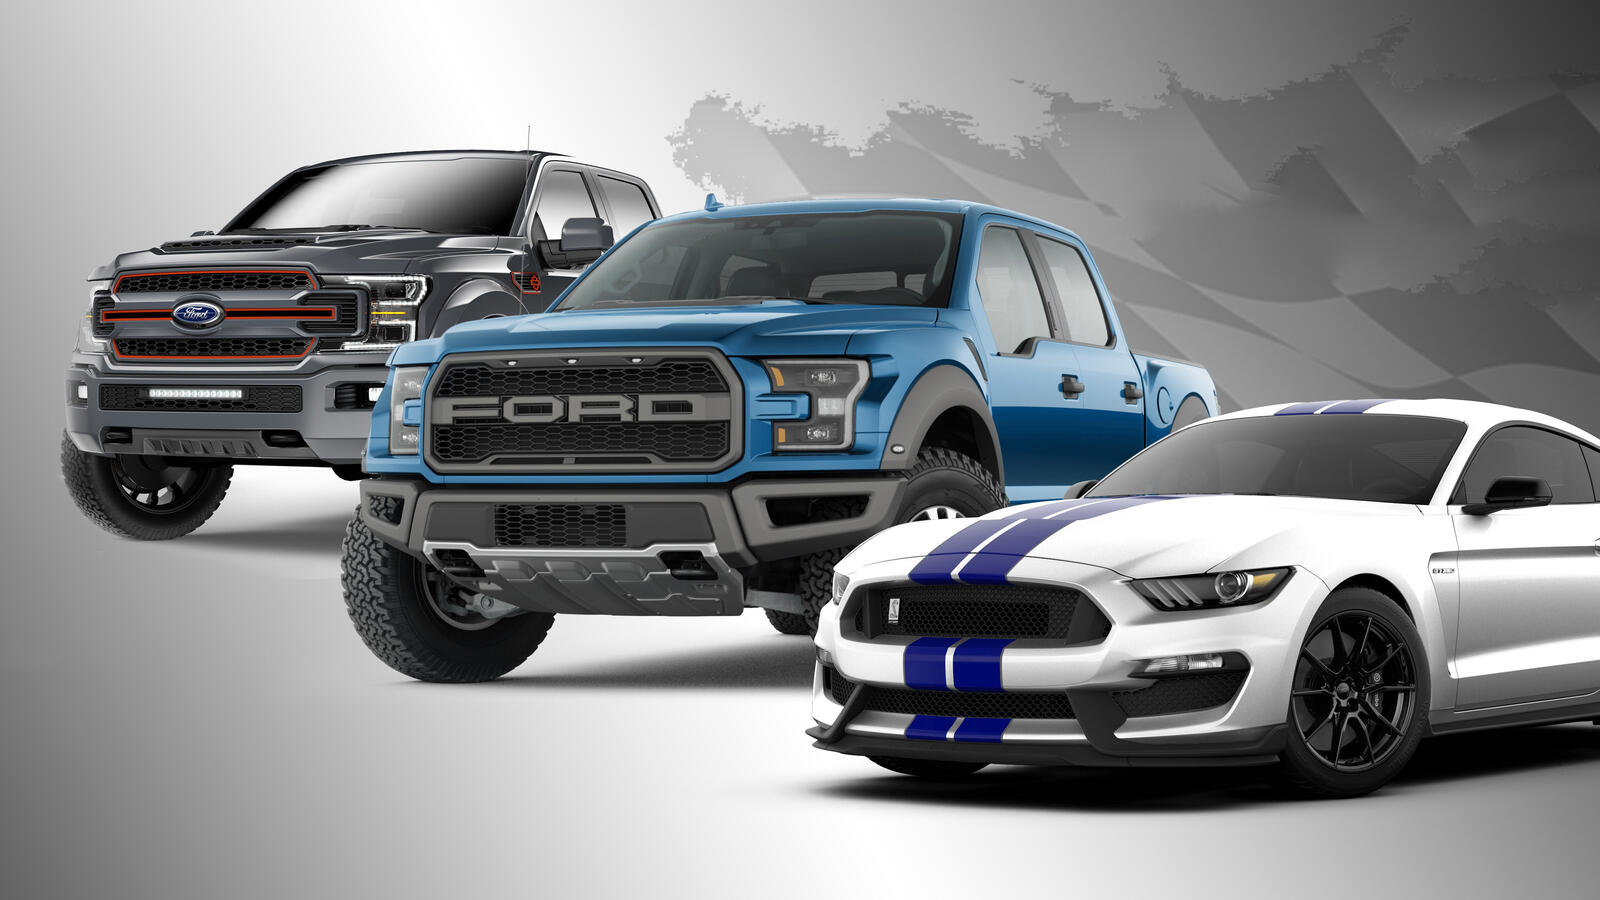 Wallpapers Ford Mustang cars three cars on the desktop